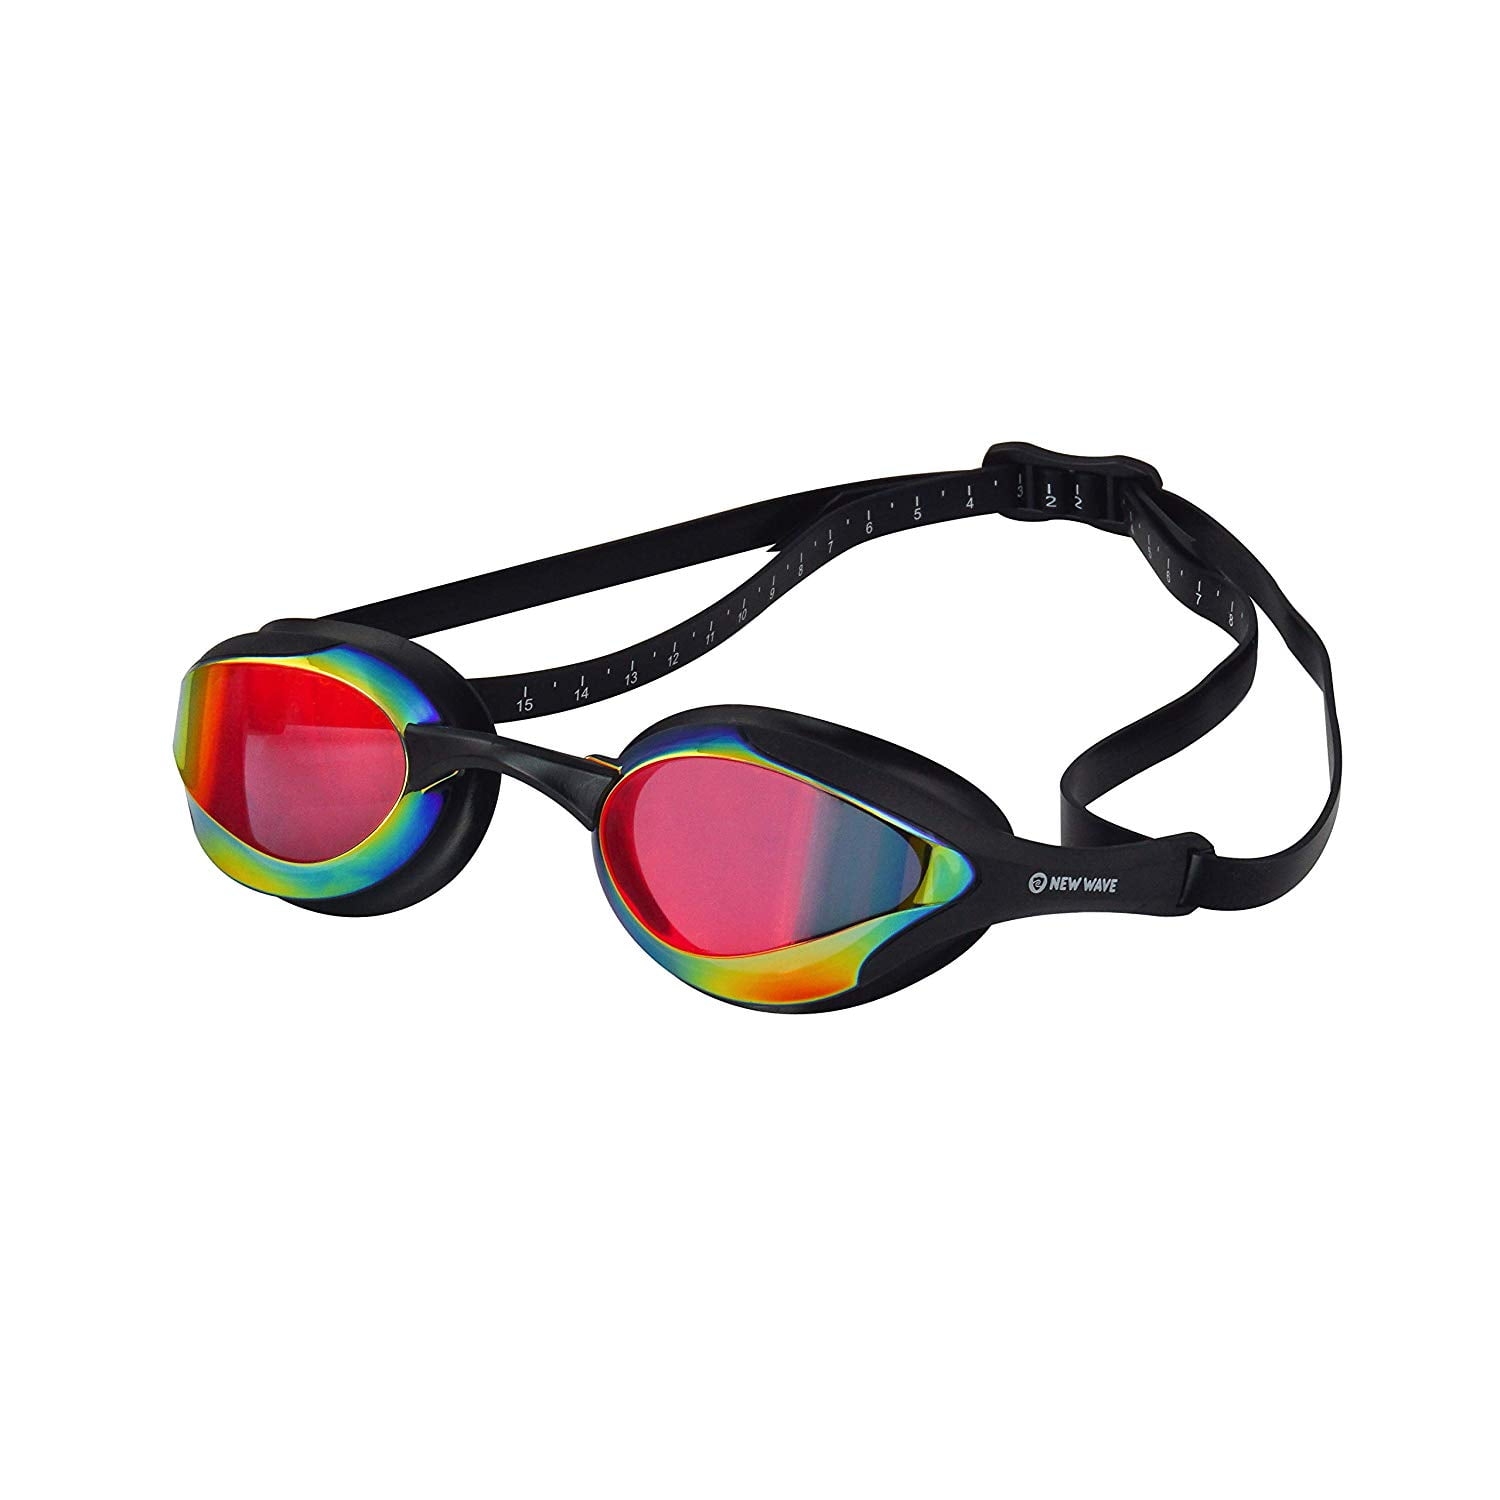 Easy Adjusting Quick Fit Lightweight Comfortable No Leaking Triathlon Open Water for Adults Men Women #73320 One-Piece Frame Anti-Fog UV Protection Barracuda Swim Goggle Bliss 